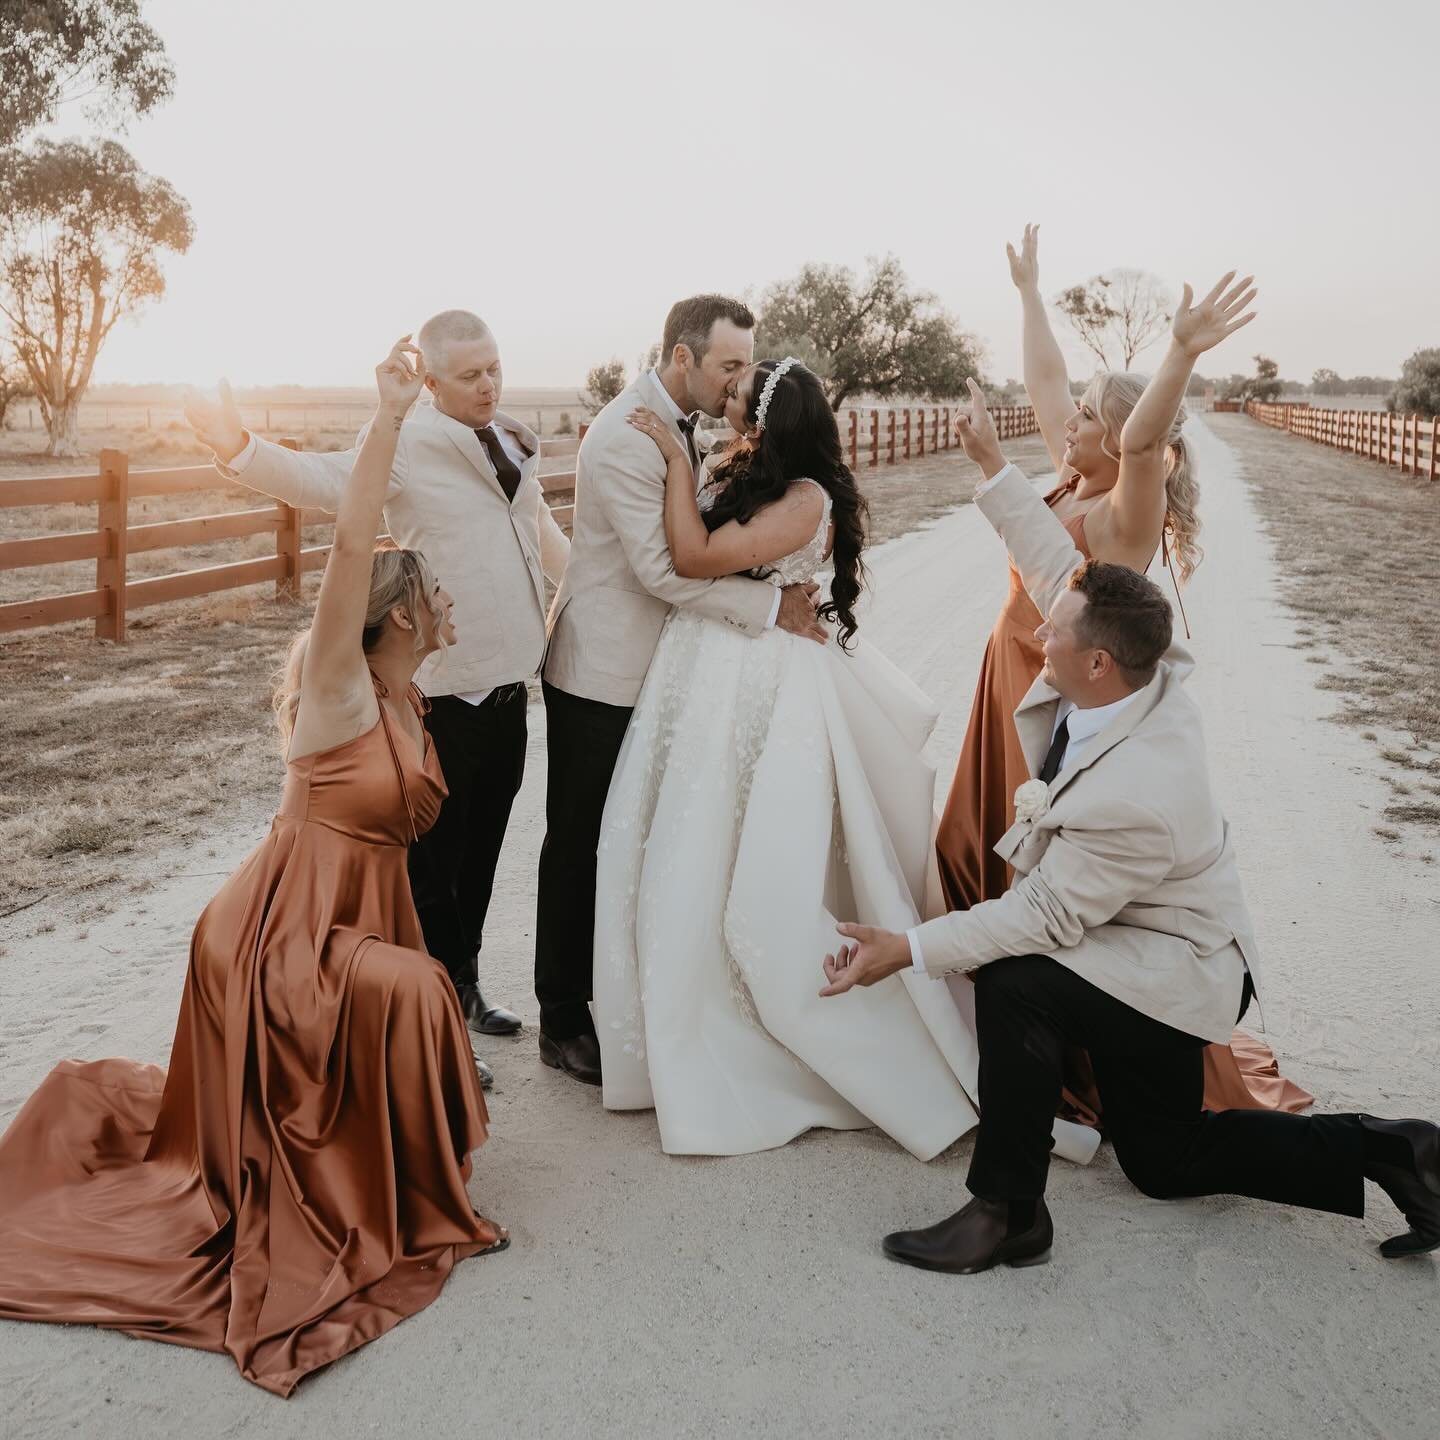 // WEDDING PARTY VIBES //
.
.
Your wedding party will be completely invaluable to you in the lead up to the day and will be there to support, guide and celebrate with you on the day! 

Wedding party members can:

. Help with planning and preparation 